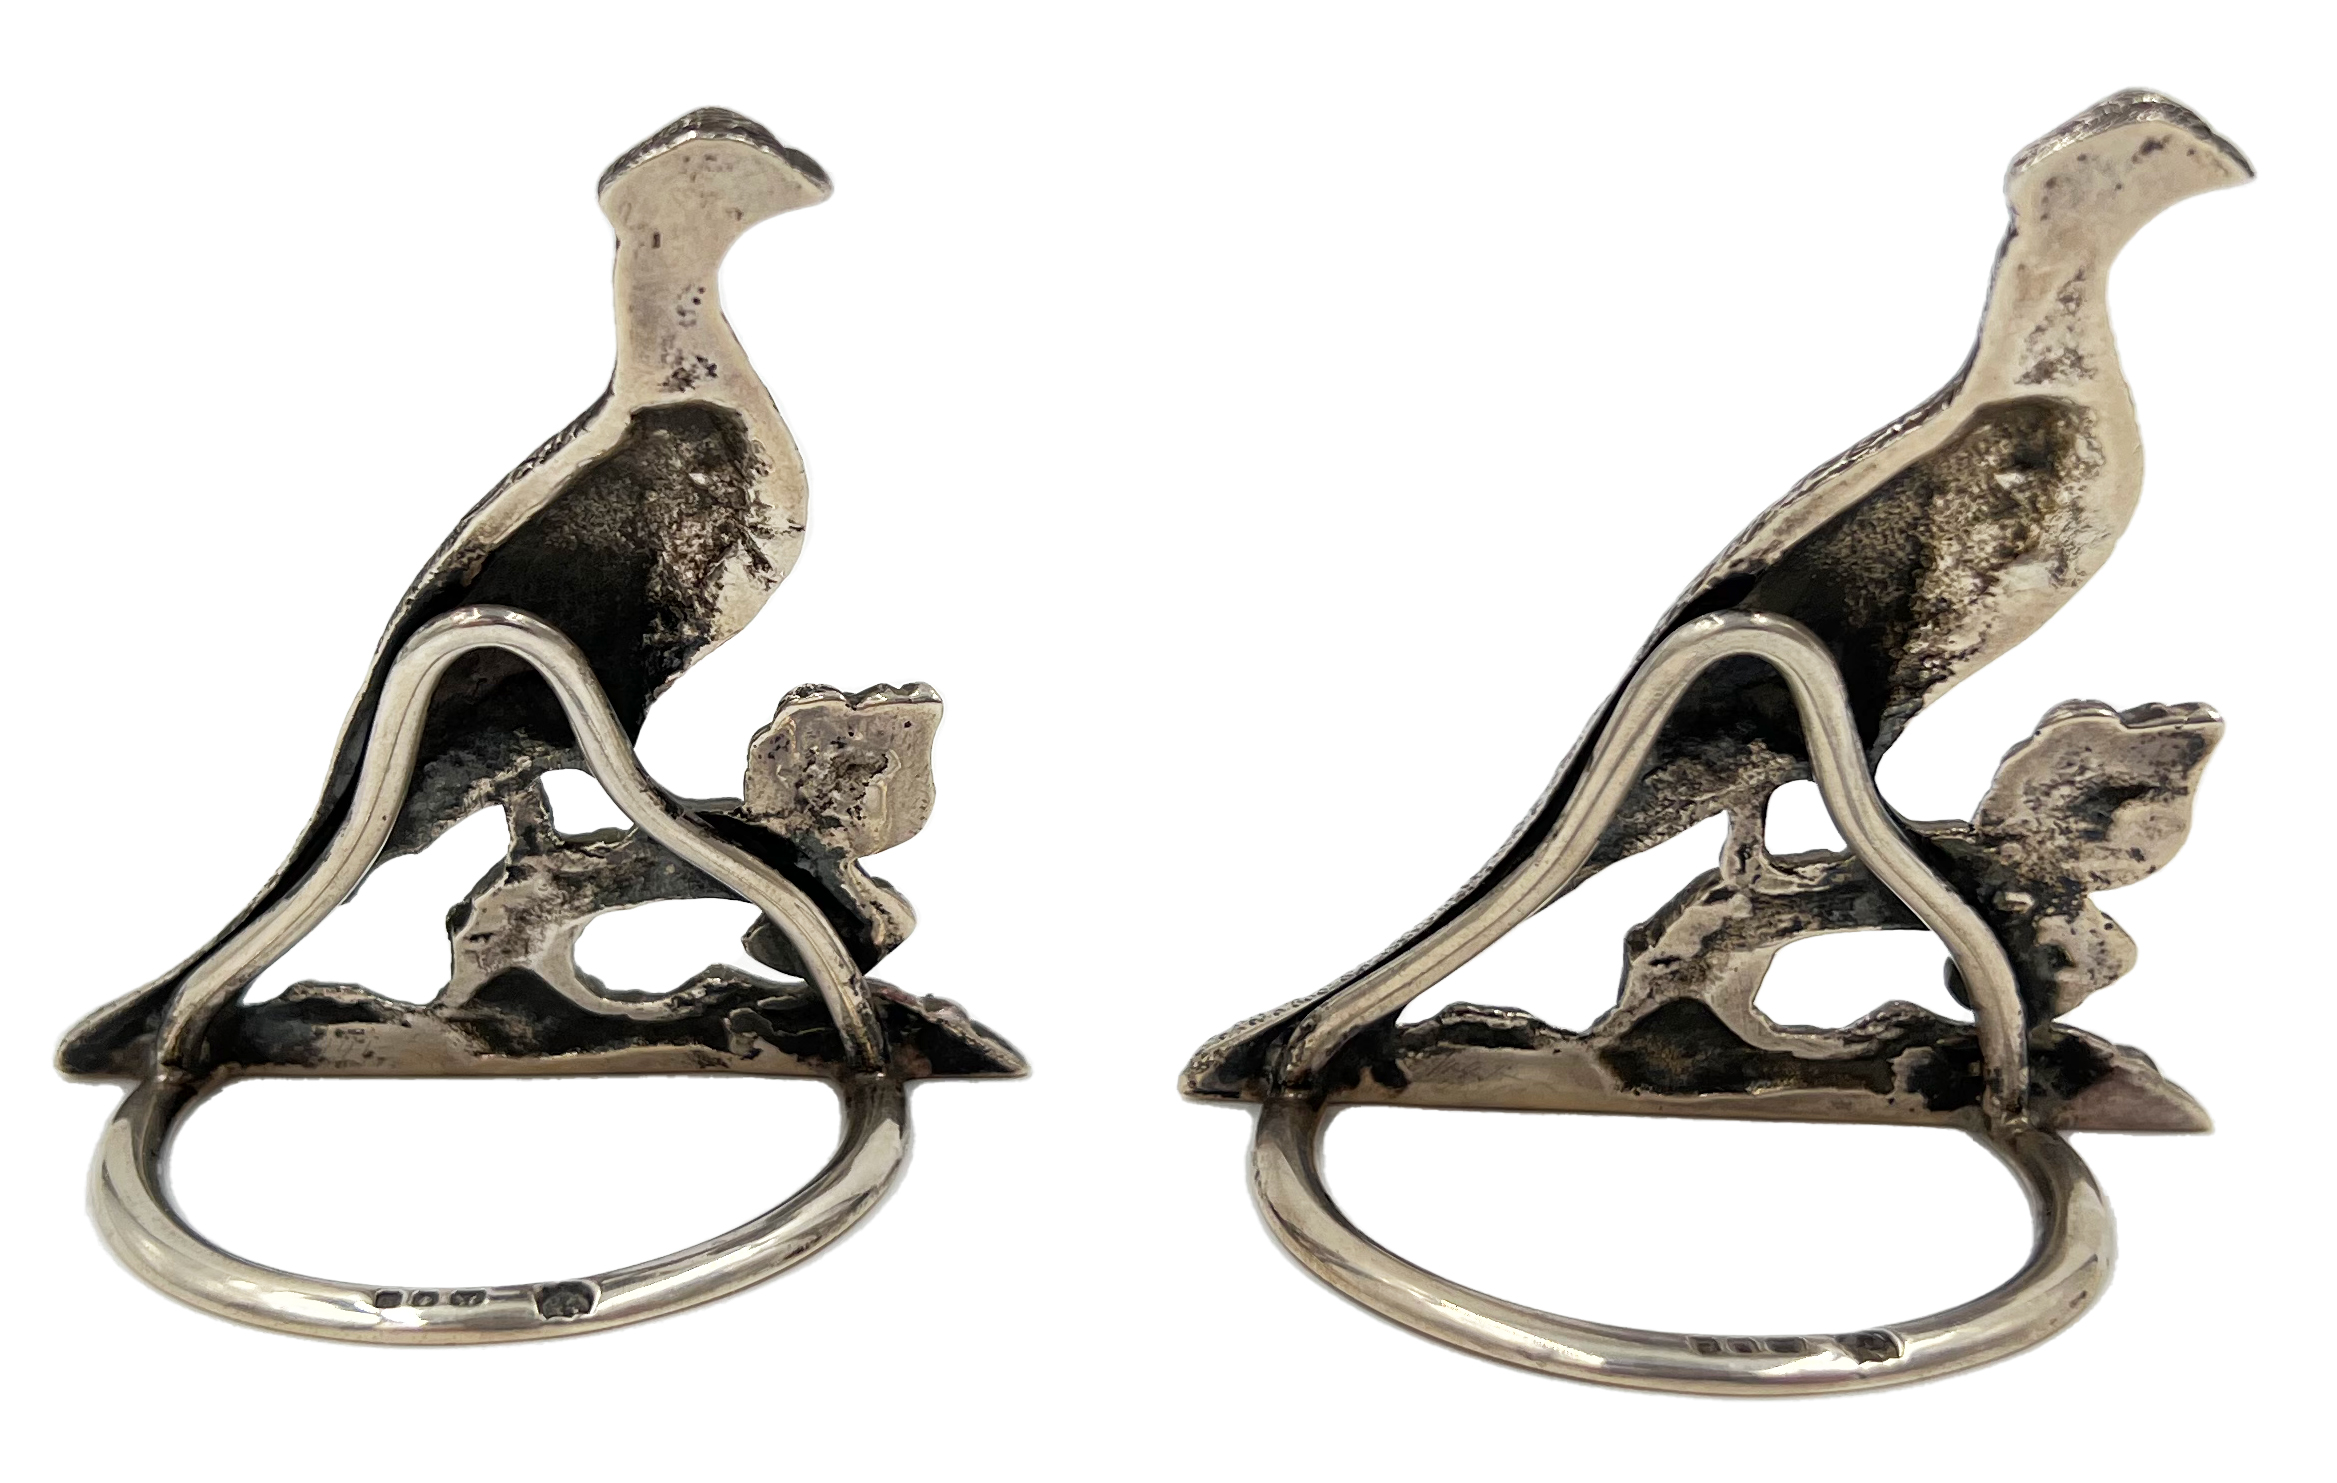 A GOOD QUALITY PAIR OF SILVER PHEASANT/GROUSE MENU HOLDERS, LONDON, VANDER & HEDGES, 1937 - Image 3 of 4